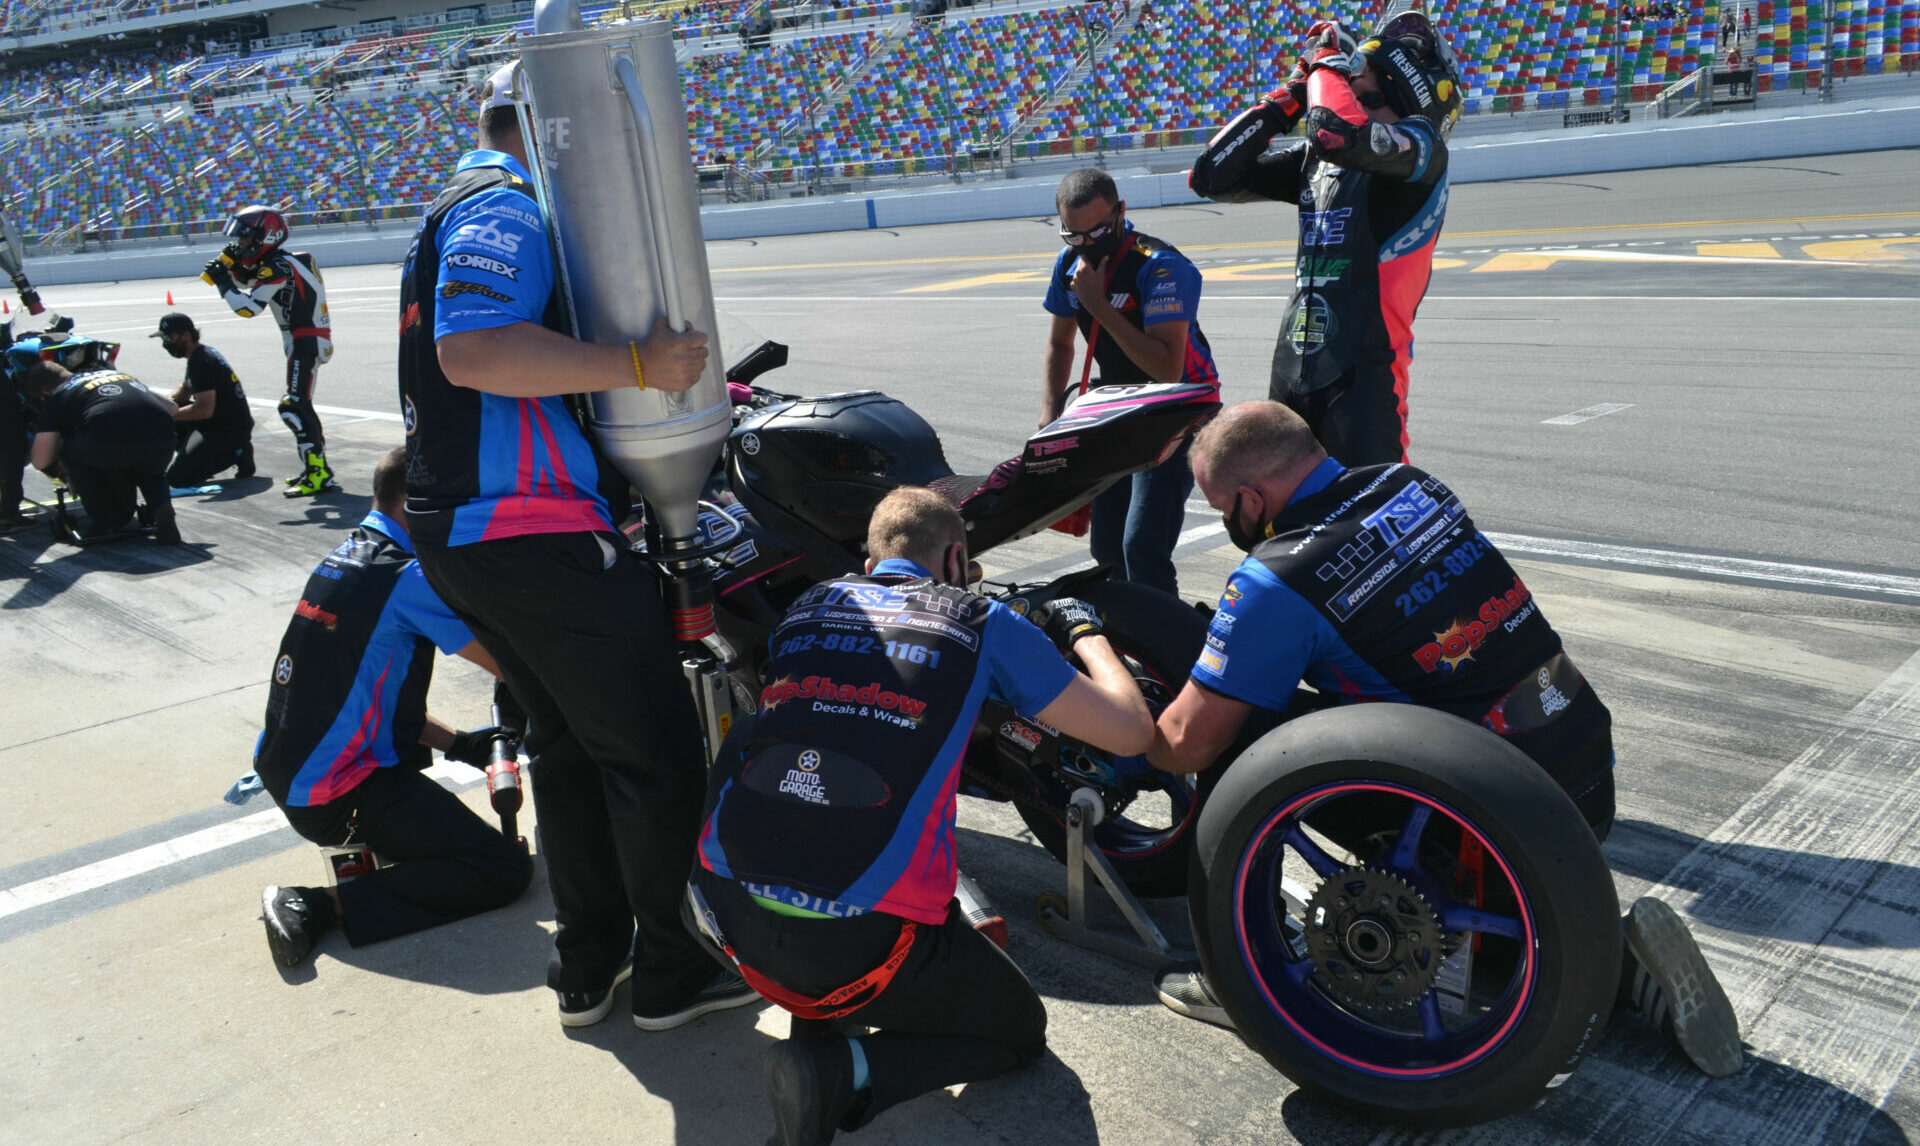 Brandon Paasch takes a drink while his TSE Racing crew refuels and changes tires on his Yamaha during the 2021 Daytona 200. Photo by David Swarts.